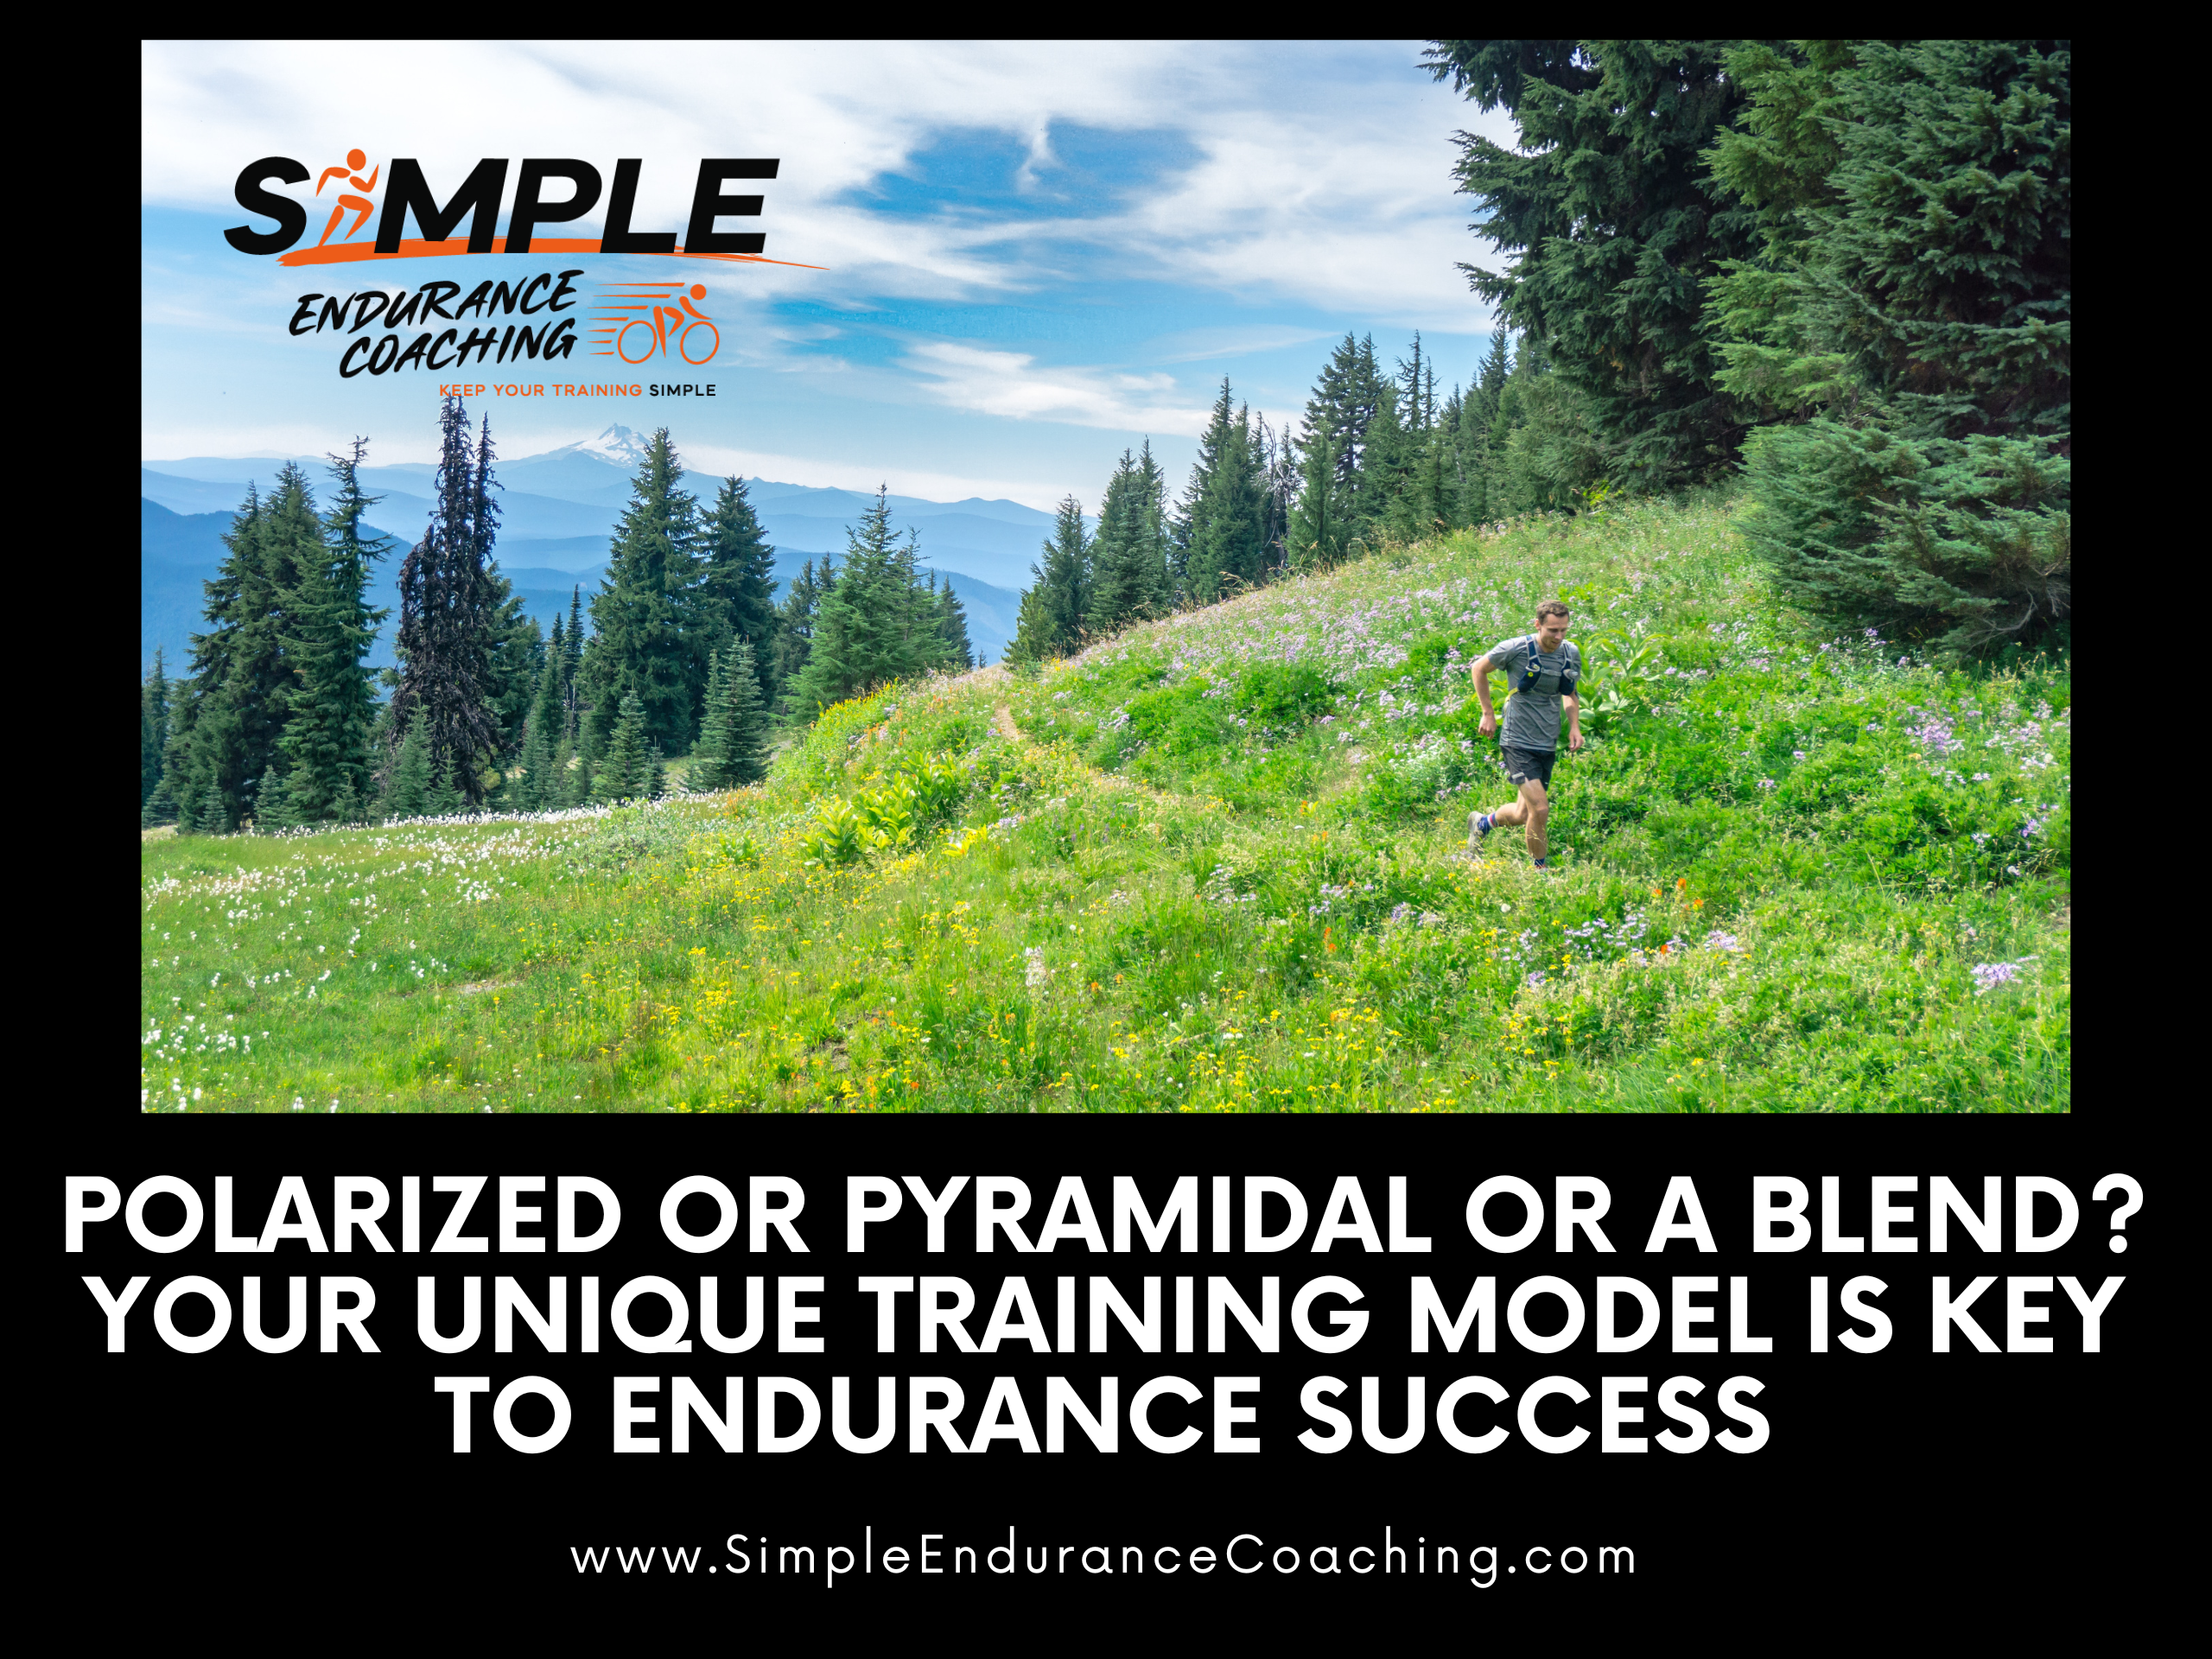 Polarized or Pyramidal or a Blend? Your Unique Training Model is Key to Endurance Success